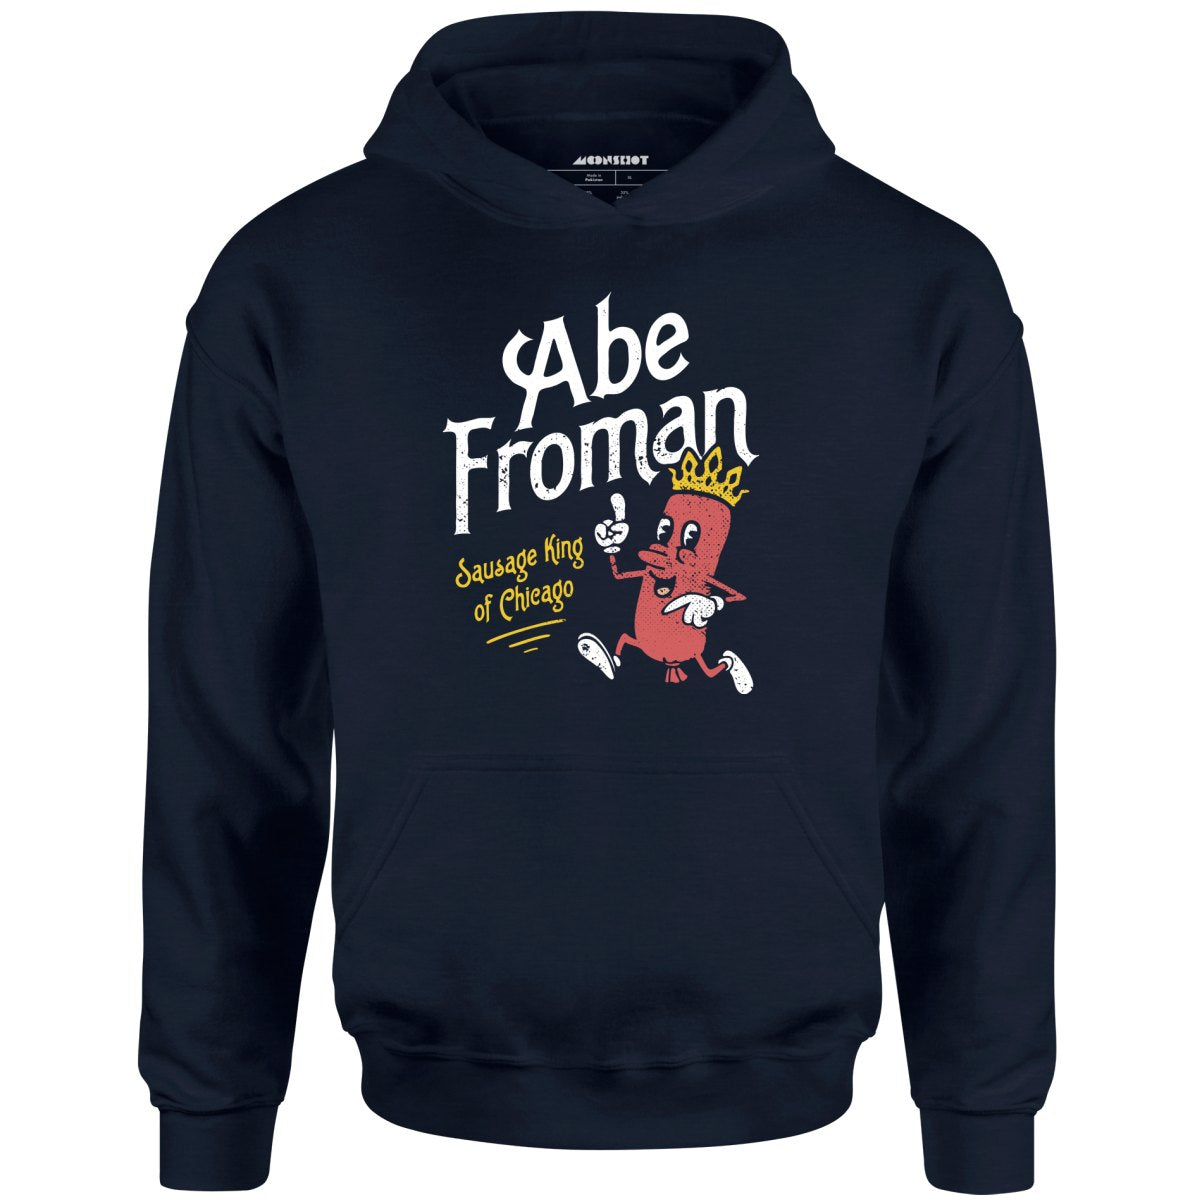 Abe Froman - Sausage King of Chicago - Unisex Hoodie